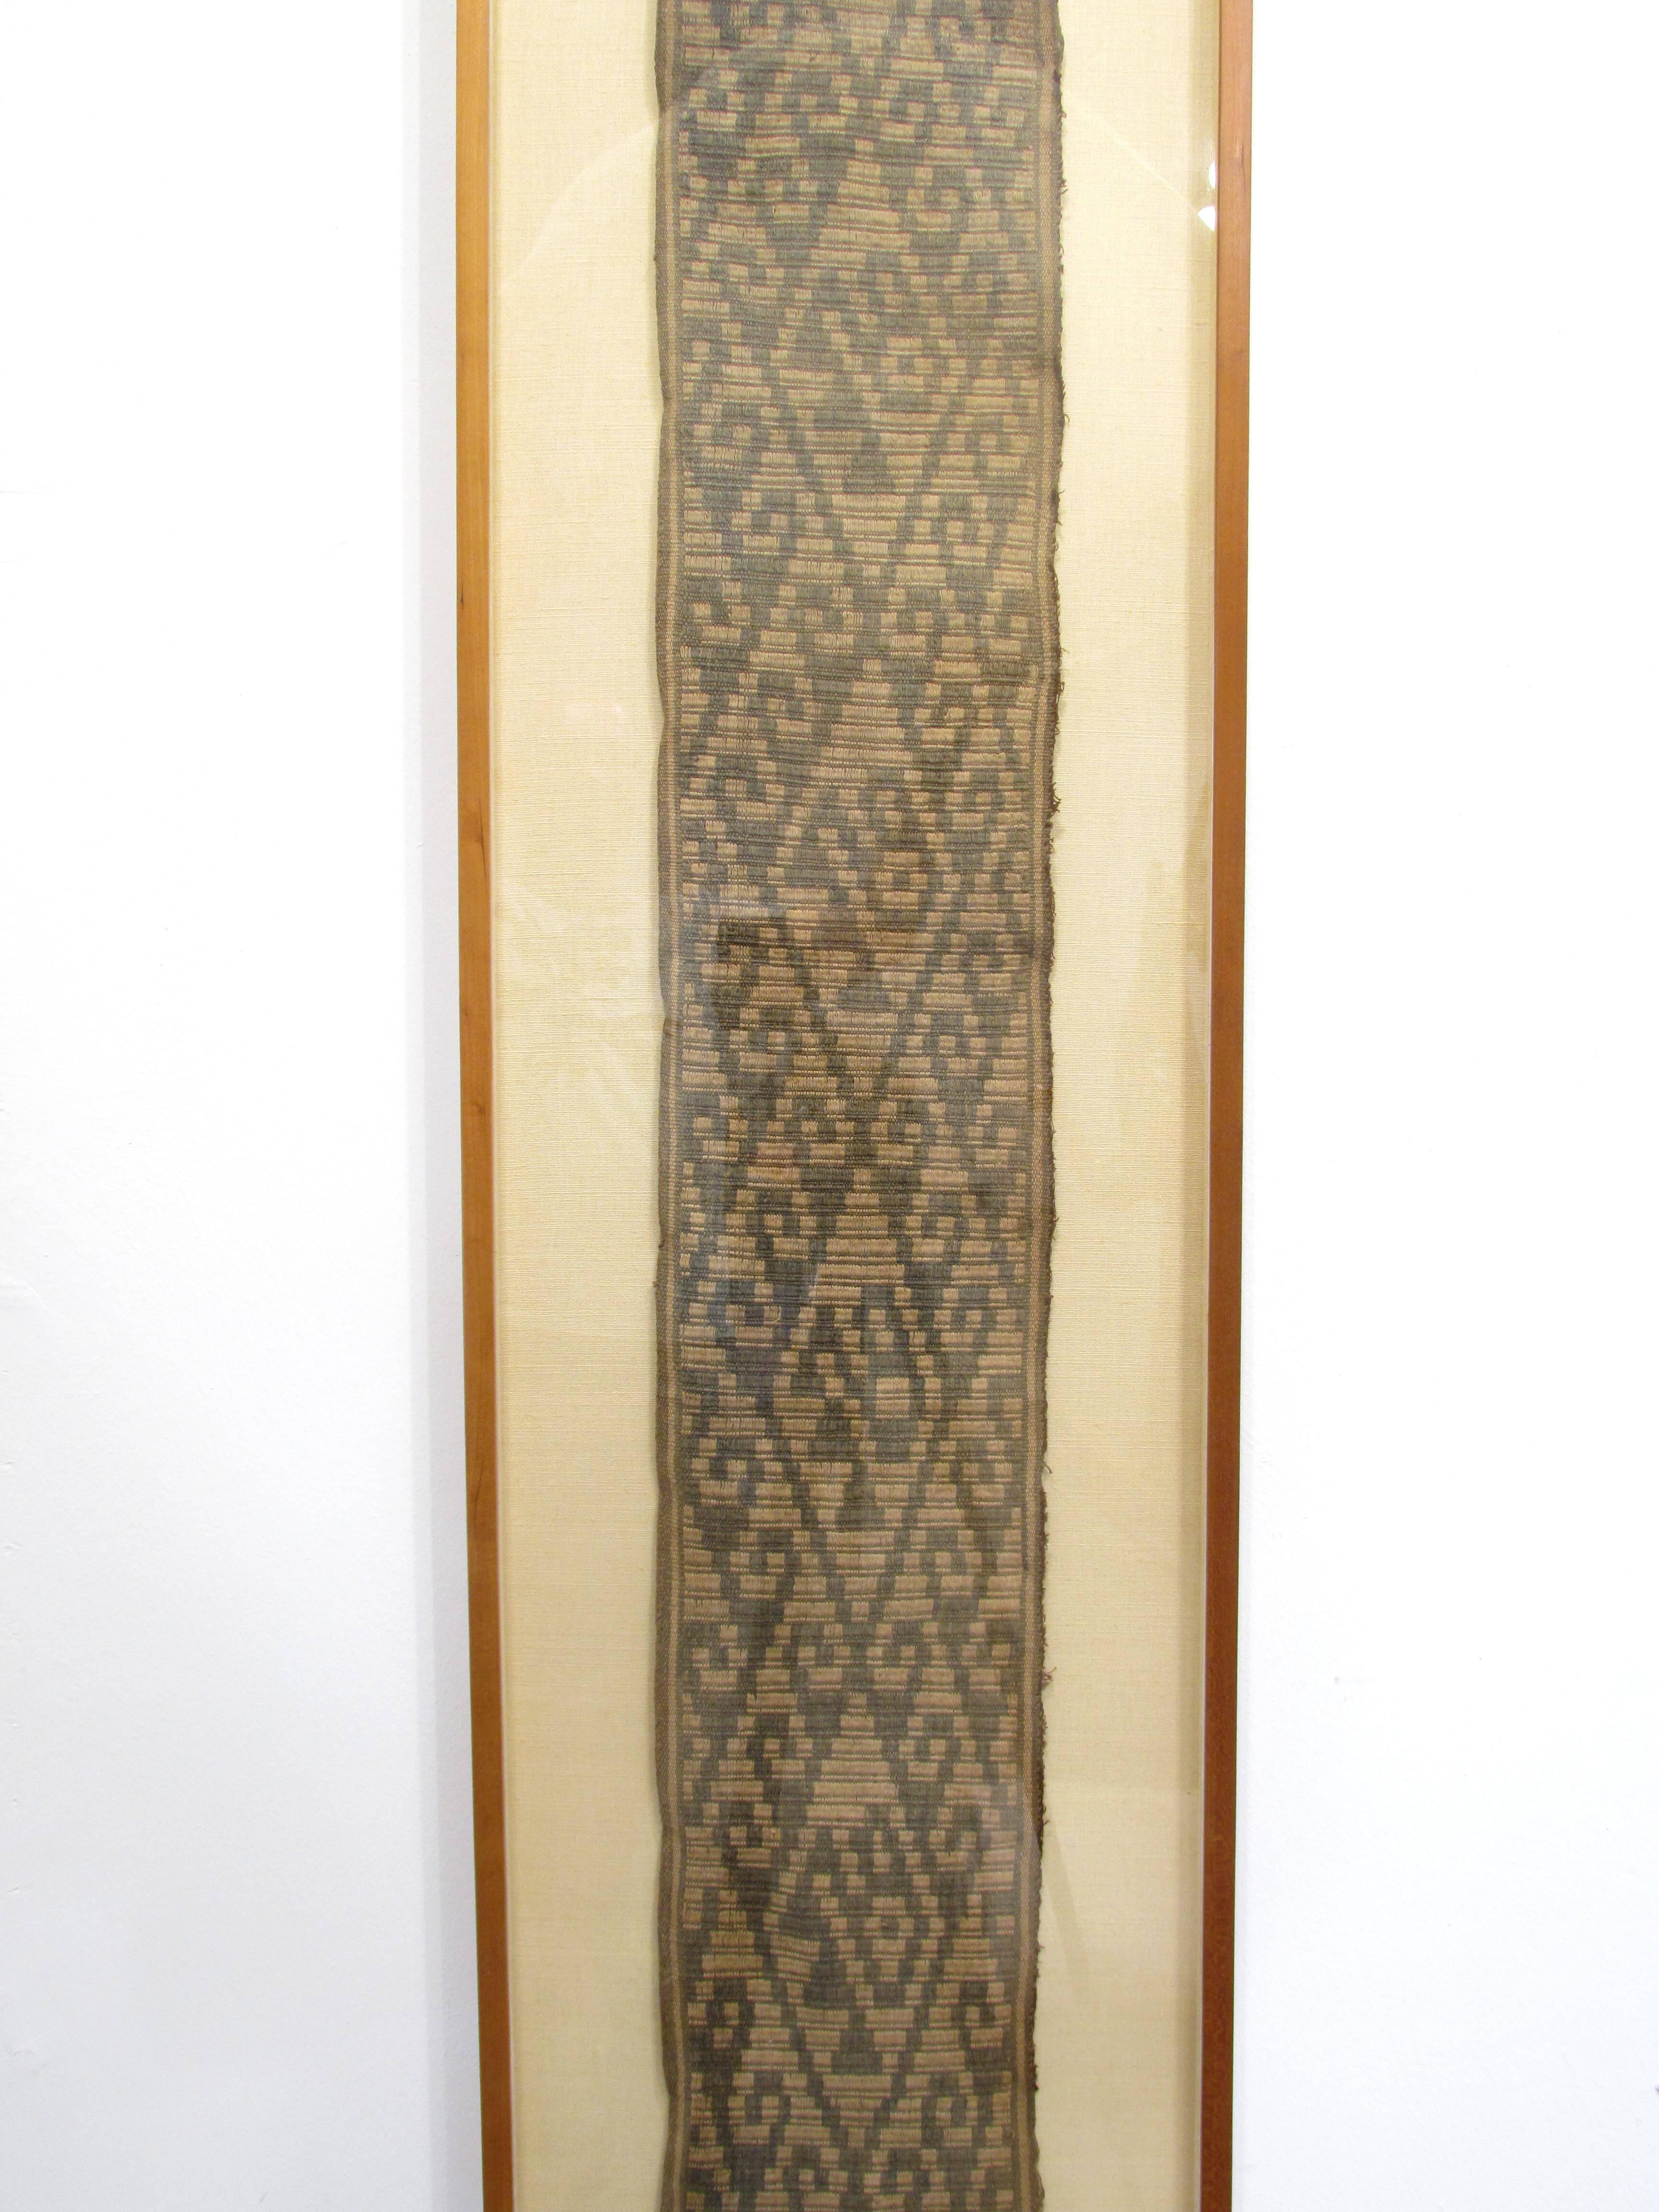 Beautiful framed long Pre-Columbian fabric can be hung vertically or horizontally.